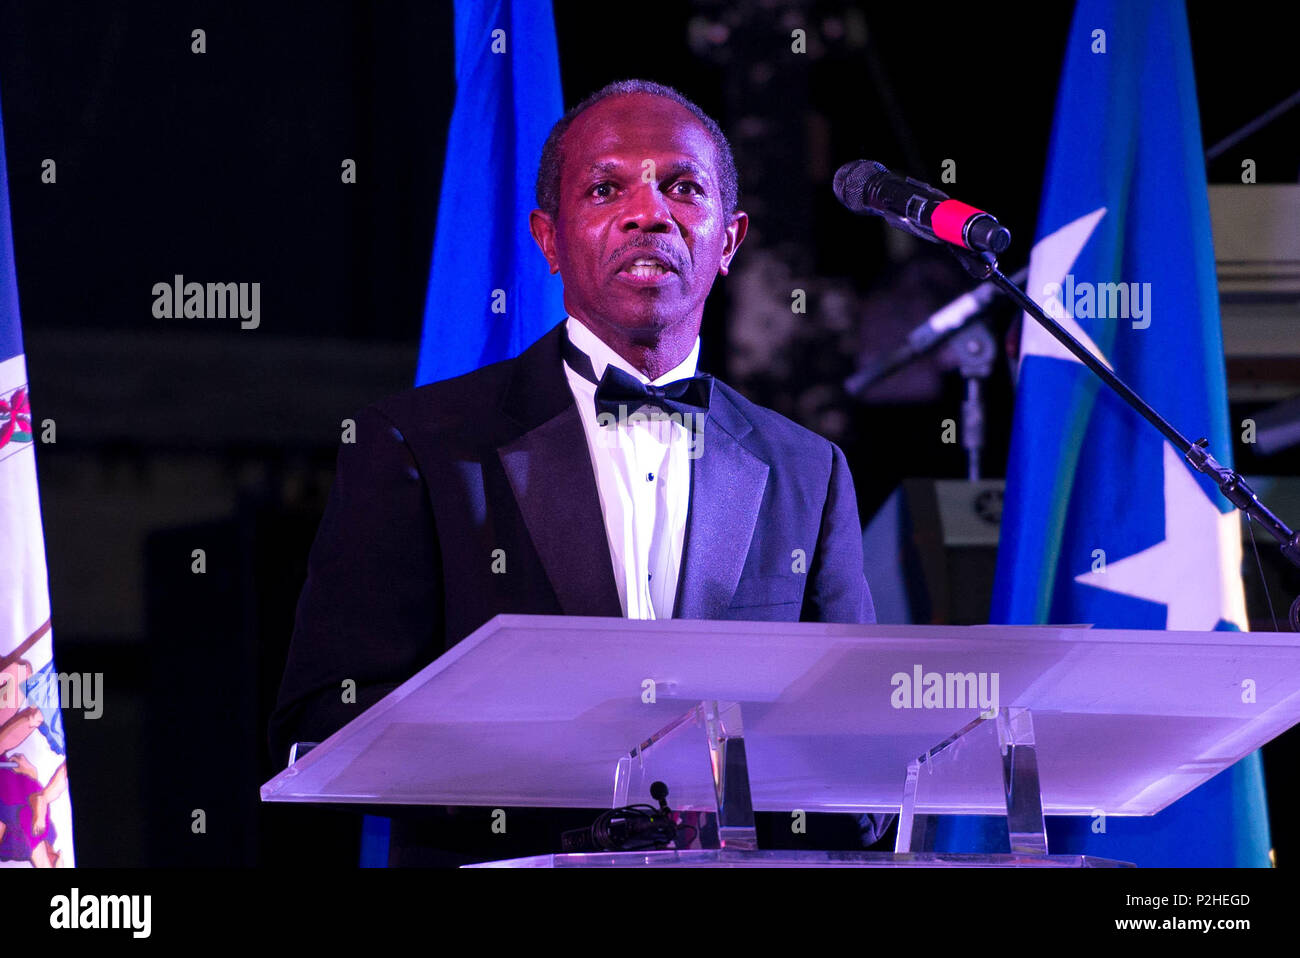 Donny Tuck, Hampton mayor, speaks at the 100-year Gala celebration at the Hampton Roads Convention Center in Hampton, Va., Sept. 17, 2016. In 1916, the National Advisory Committee for Aeronautics established Langley Field as a joint airfield for U.S. Army, U.S. Navy and NACA aircraft. (U.S. Air Force photo by Airman 1st Class Derrick Seifert) Stock Photo